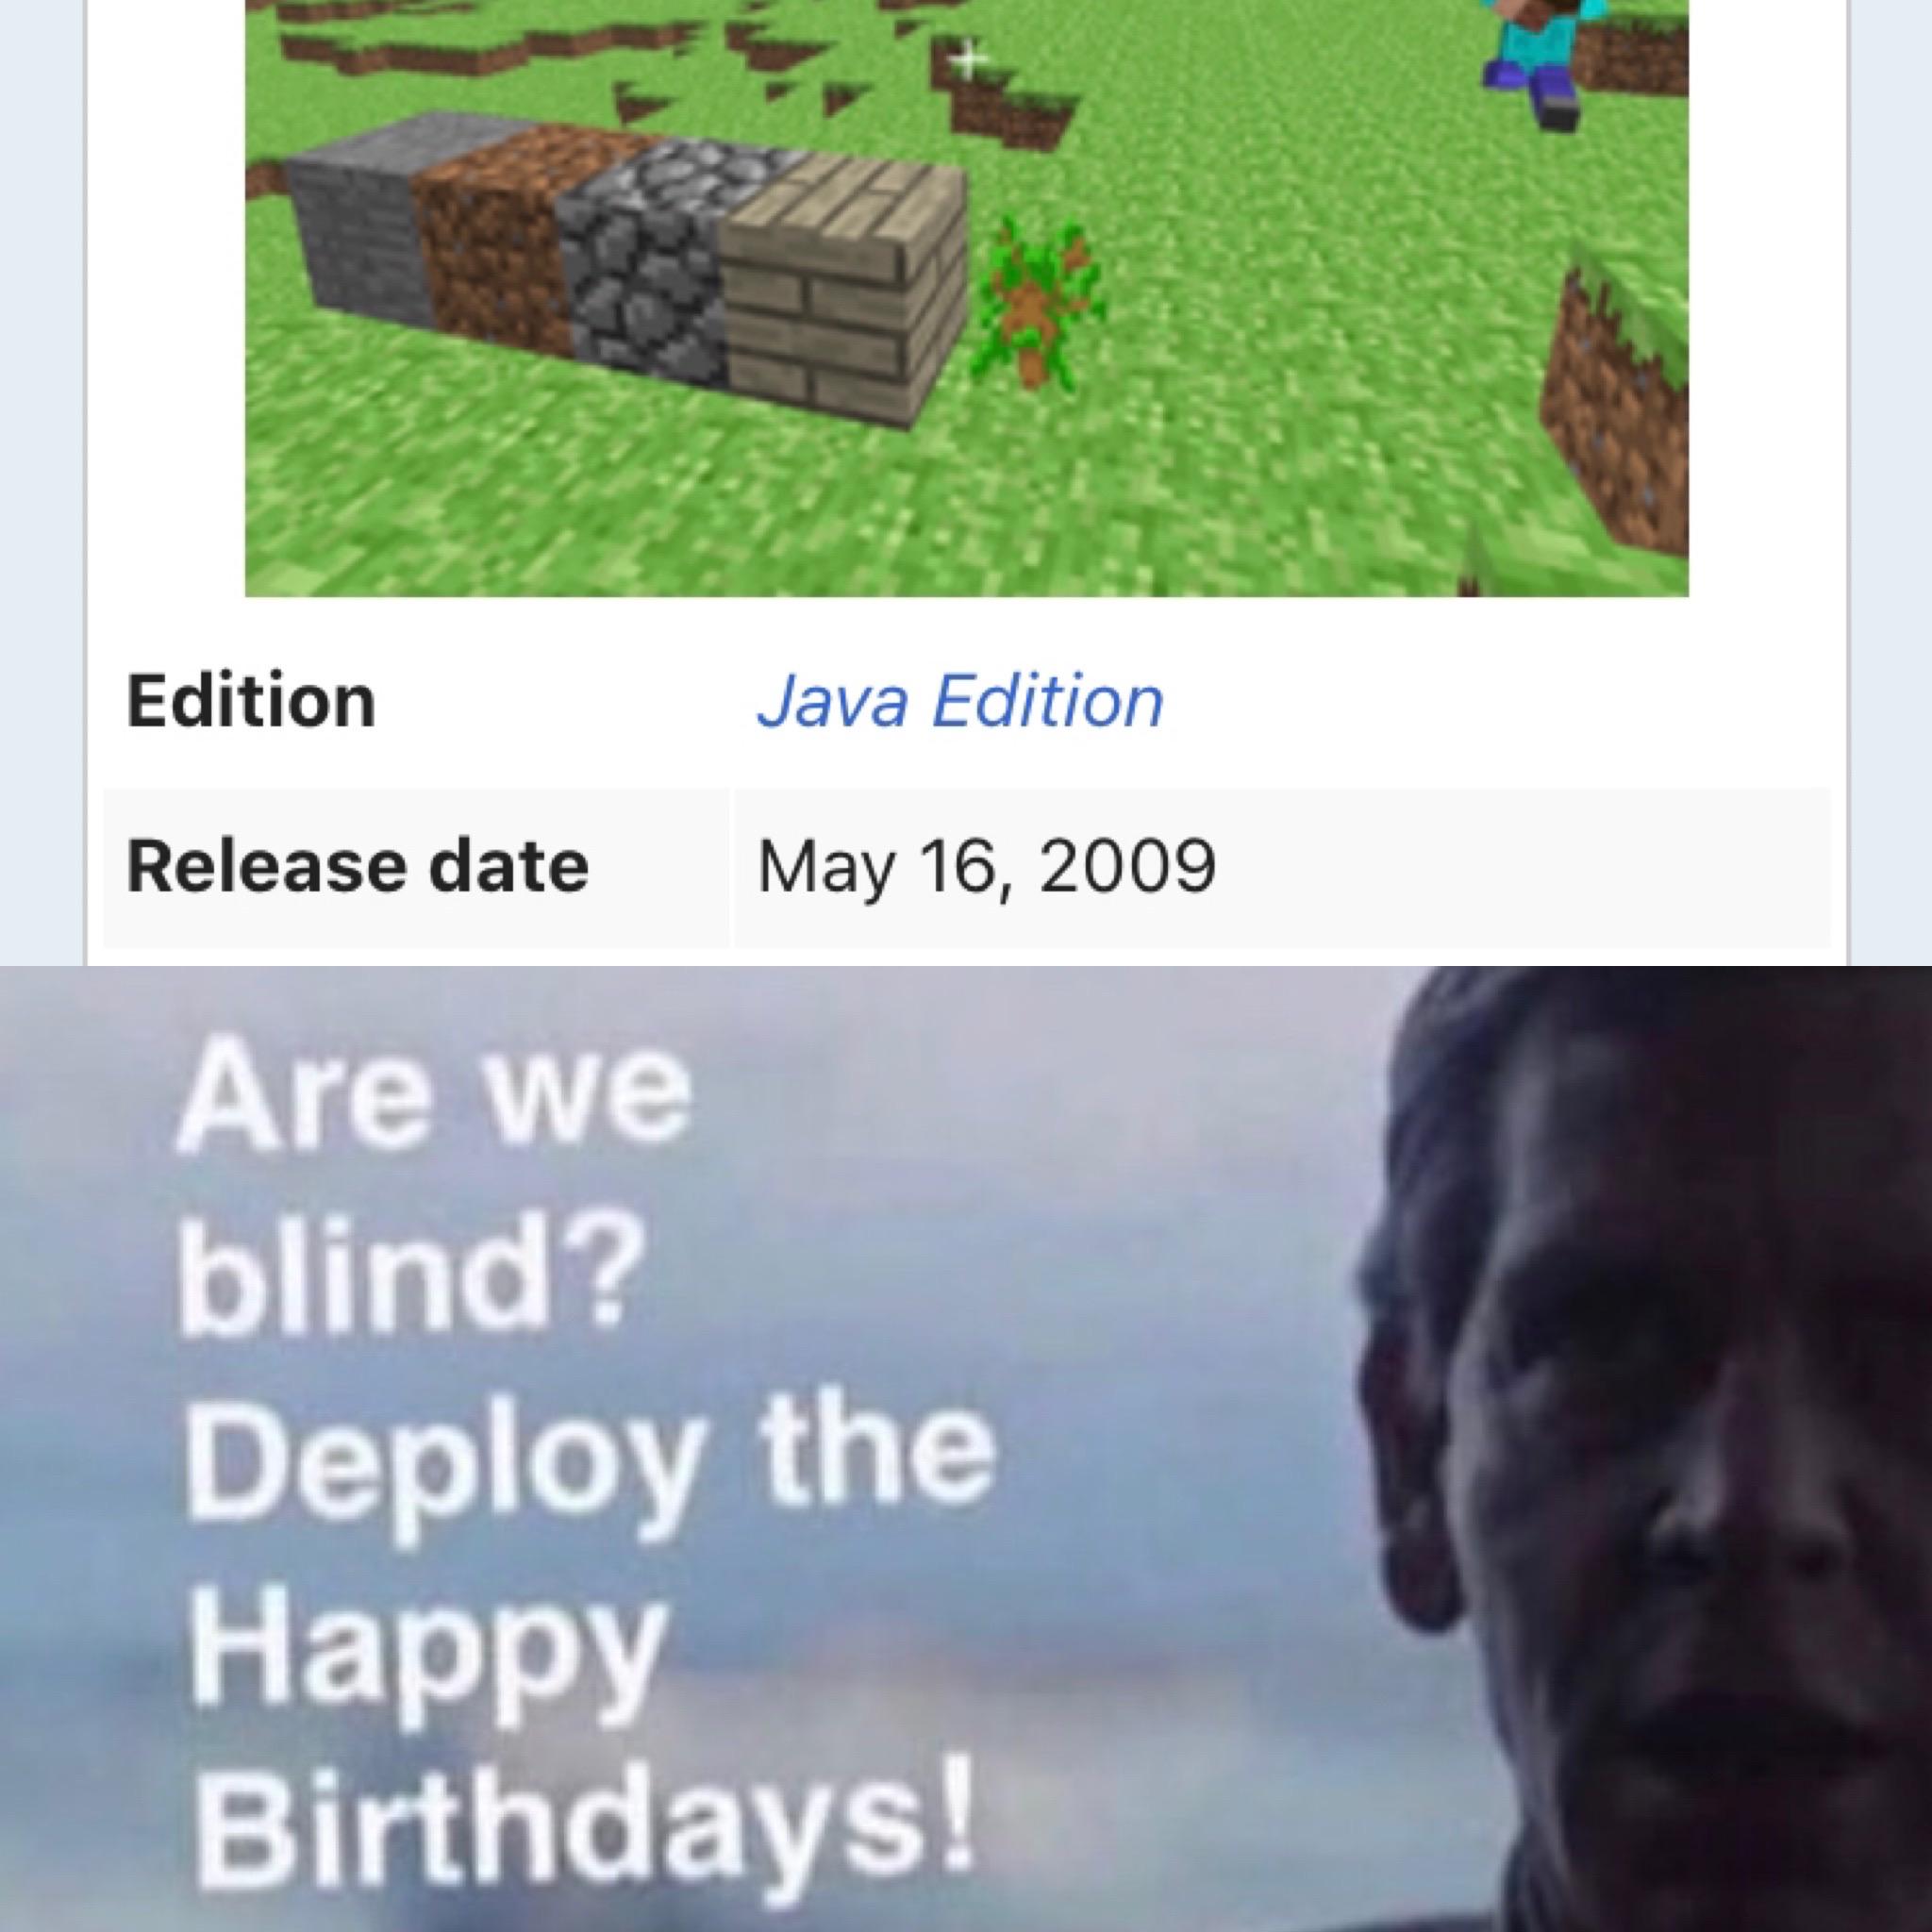 Minecraft, Minecraft, Visit, Negative, Feedback, False Negative minecraft memes Minecraft, Minecraft, Visit, Negative, Feedback, False Negative text: Edition Java Edition Release date May 16, 2009 Are we blind? Deploy the Happy Birthdays! 